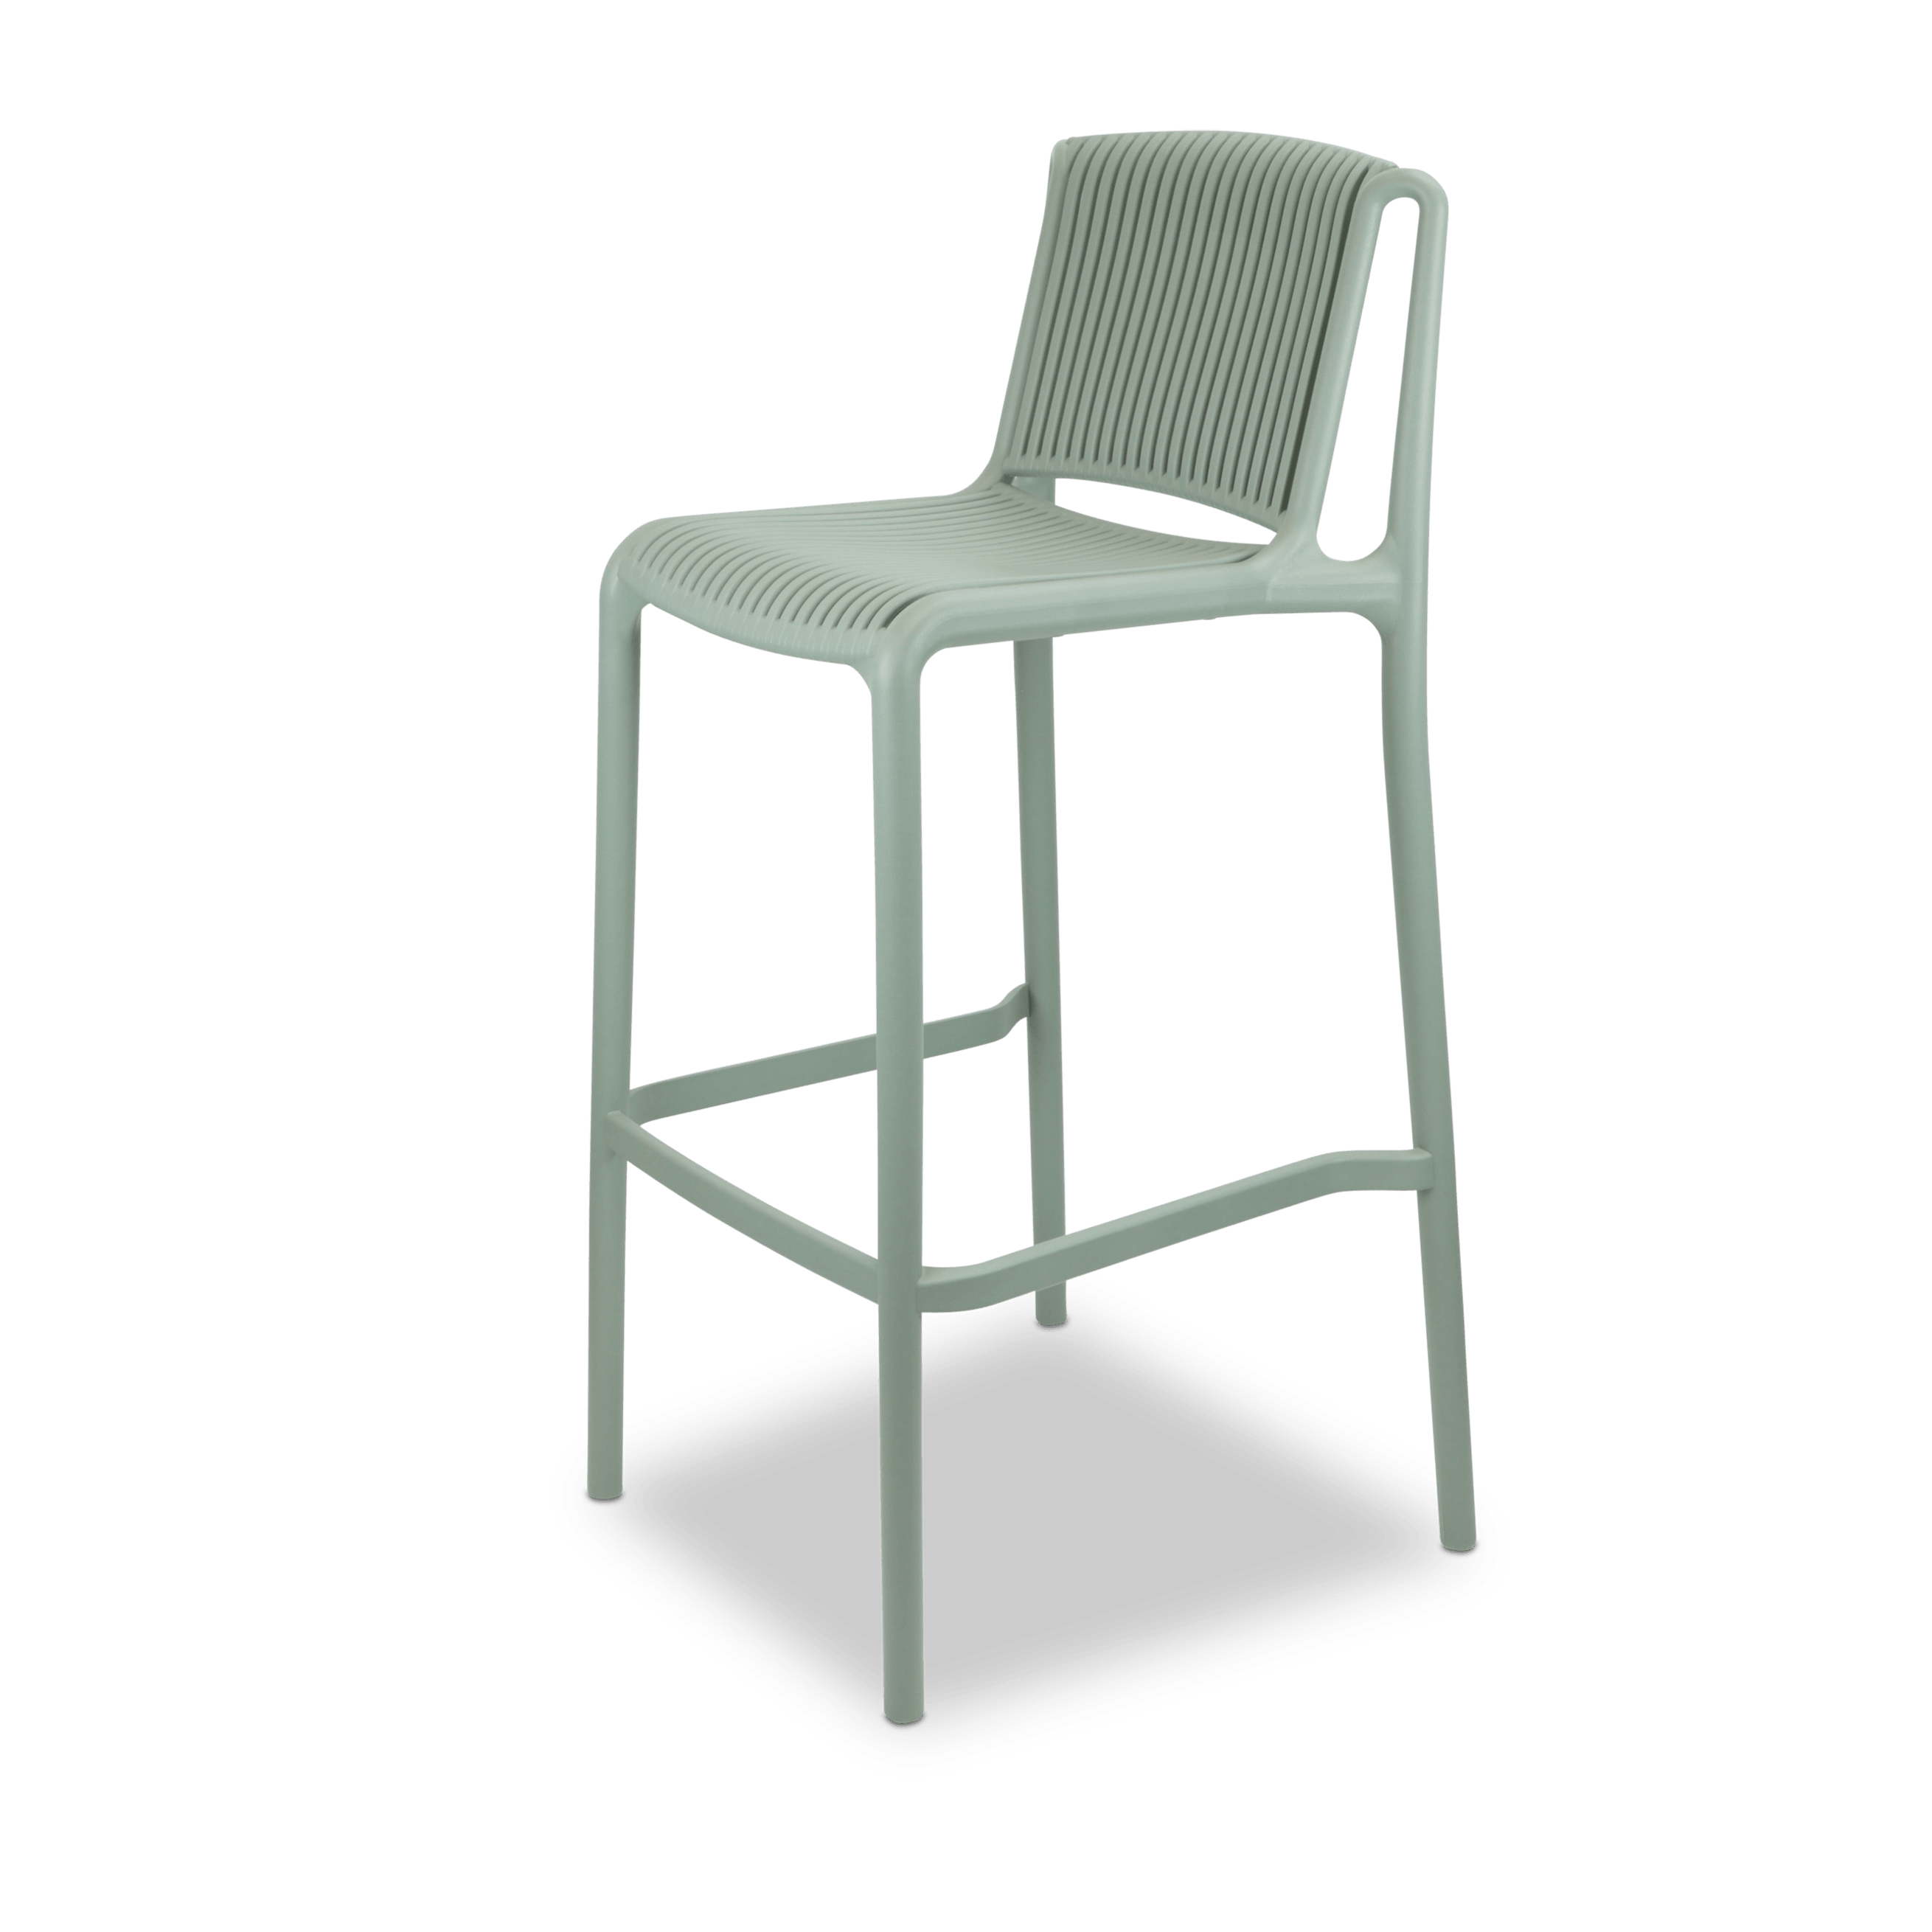 Cafe Collection Round 3pc Bar Suite in Gunmetal with UV Plastic Bar Stools (PP)